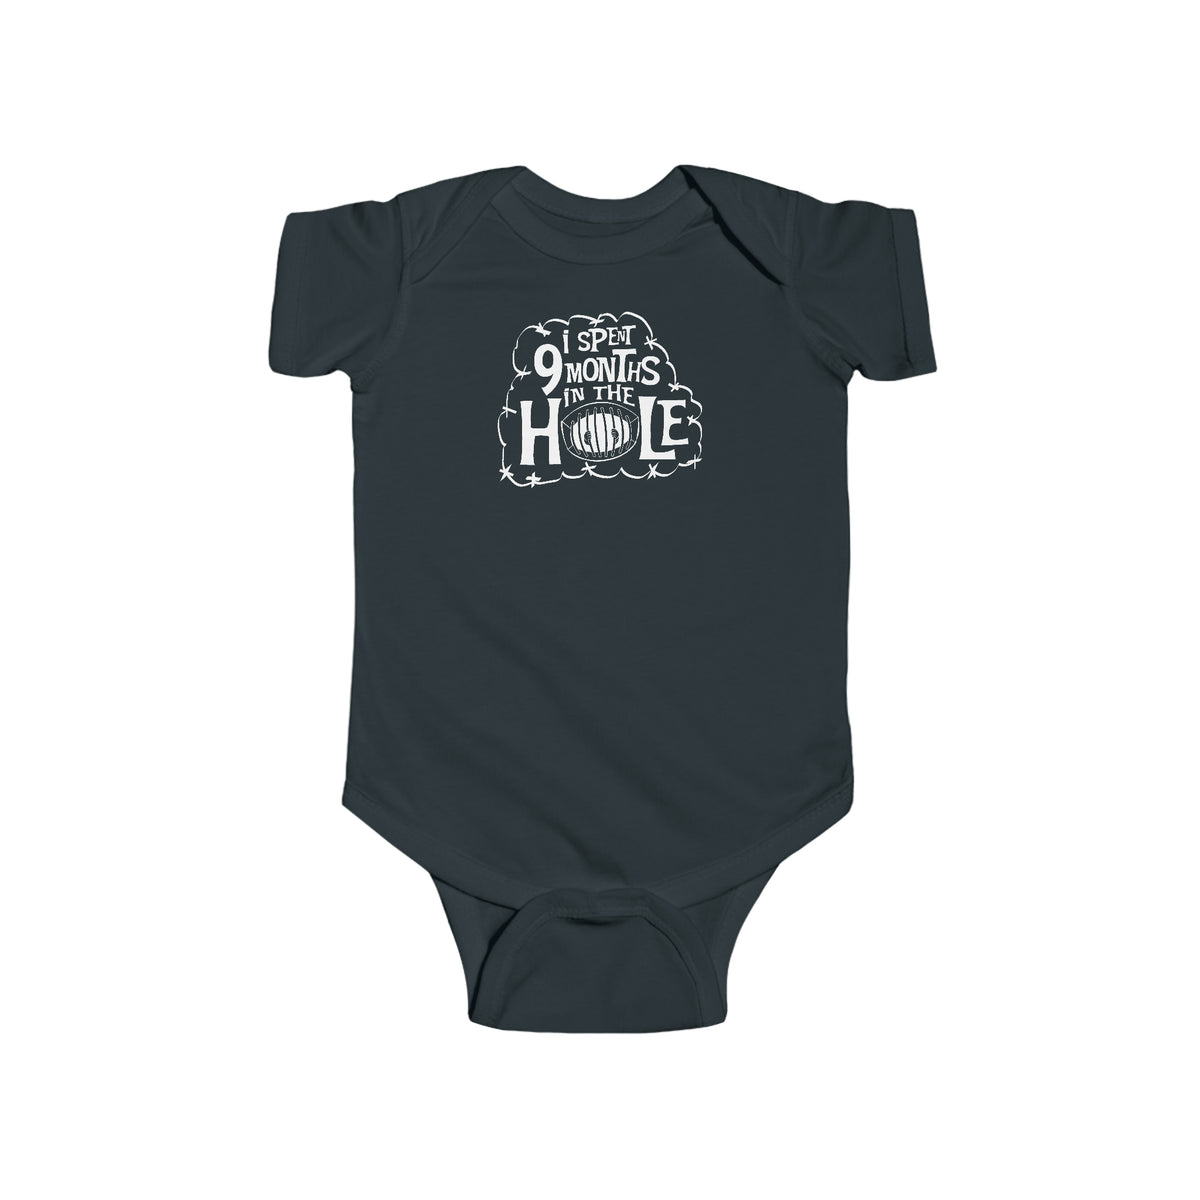 I Spent 9 Months In The Hole - Baby Onesie